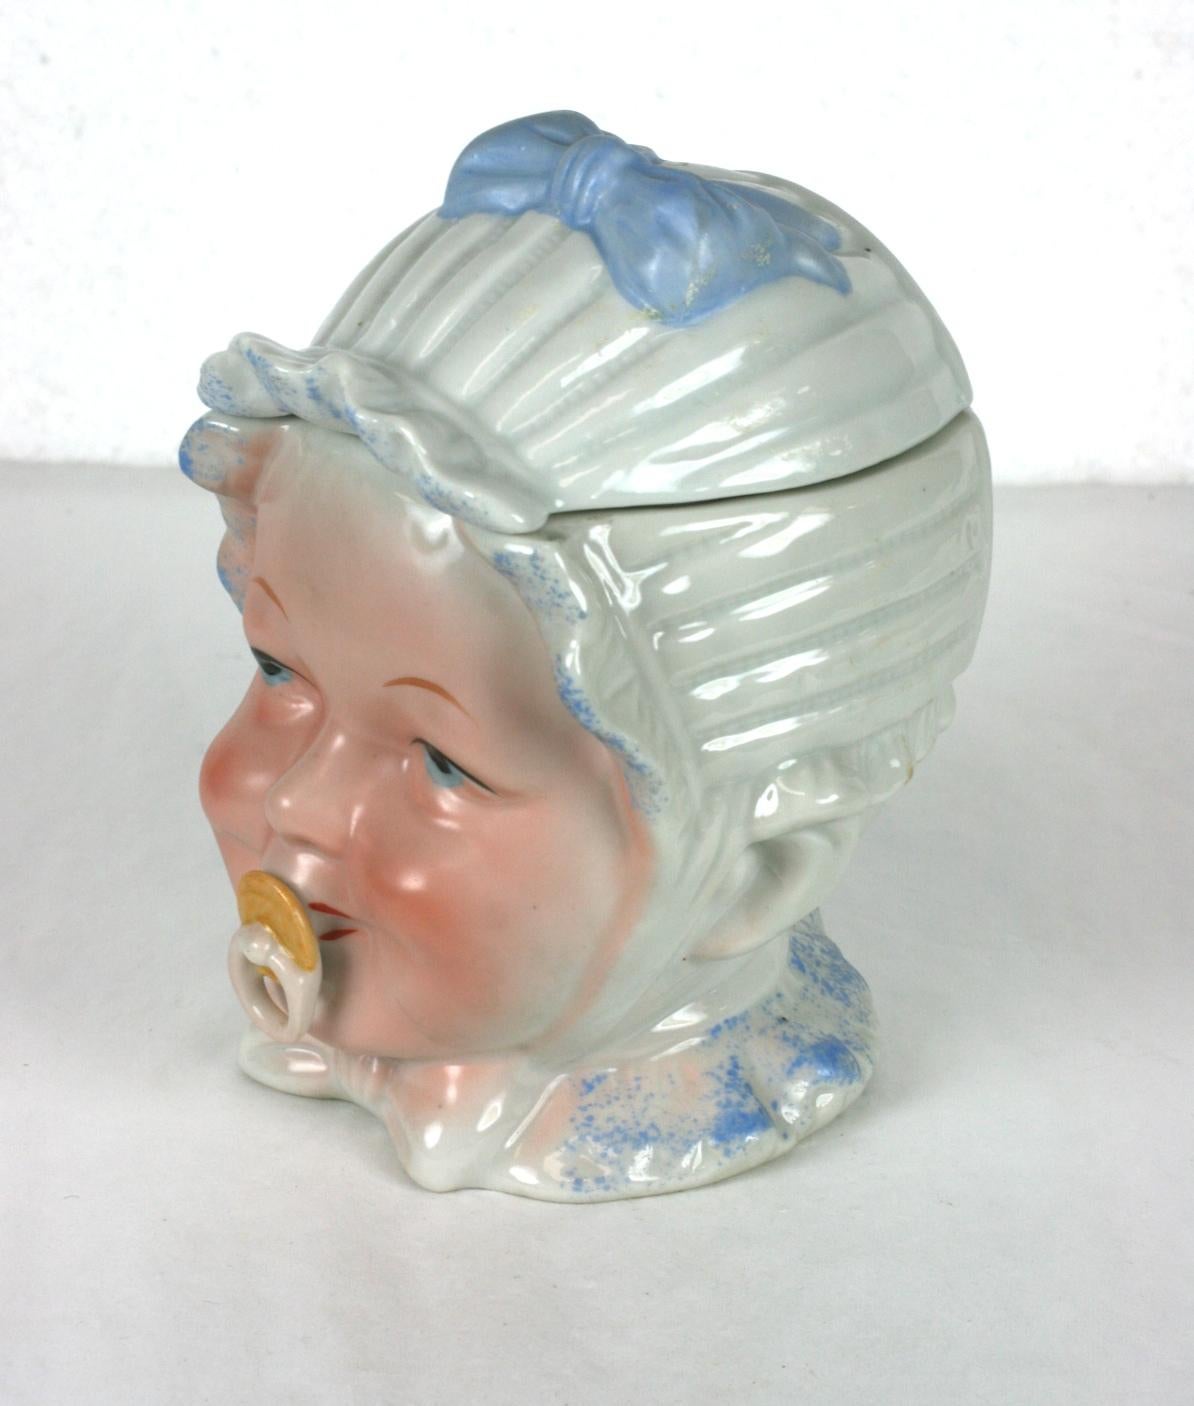 Victorian porcelain baby's head dresser jar or humidor likely made by Heubach, Germany circa 1880 to 1900. The antique porcelain dresser jar is in the shape of happy baby's head with a mouth pacifier and a blue and white bonnet with a blue ribbon.